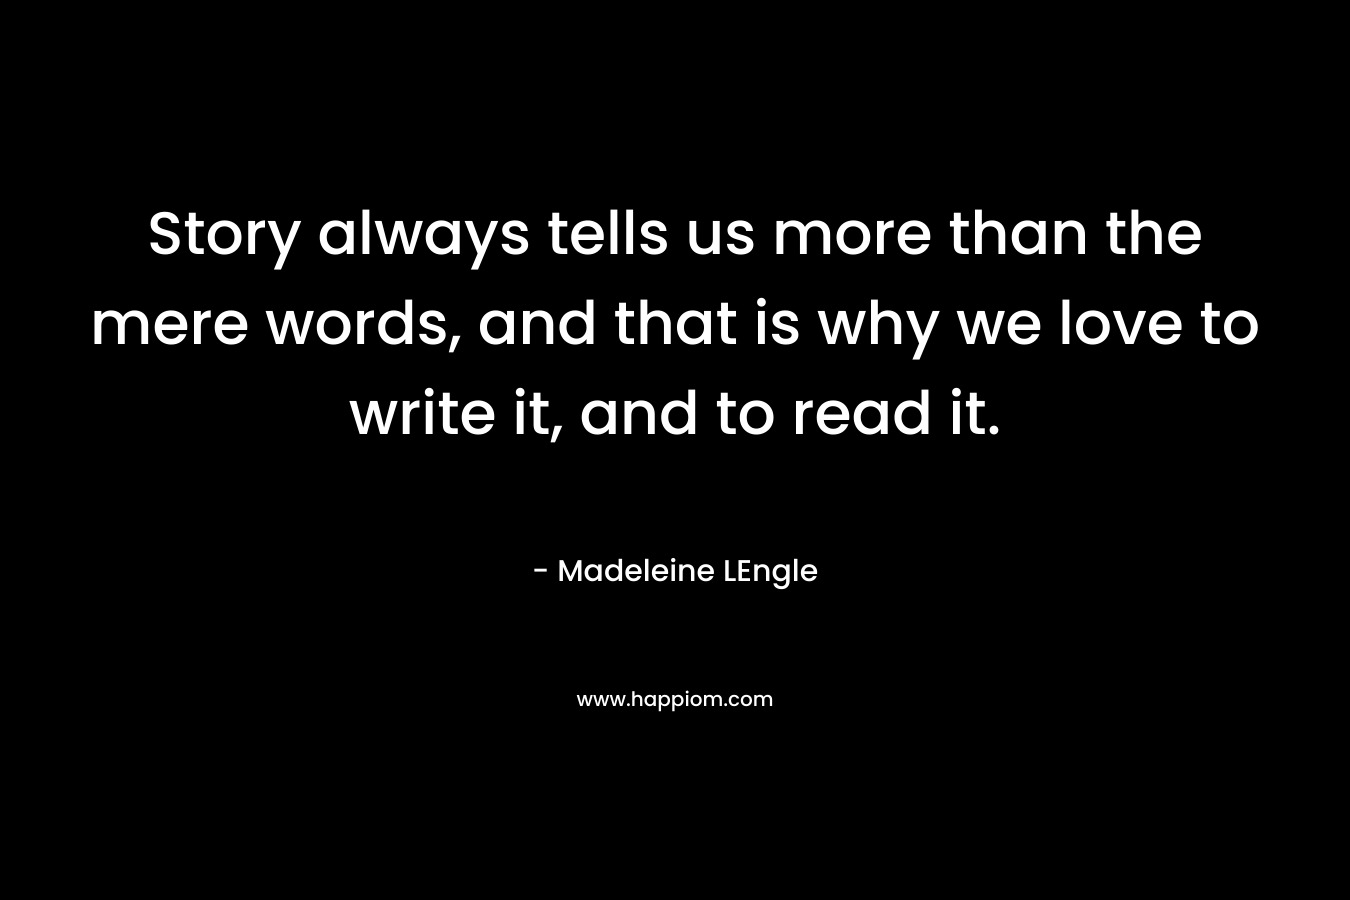 Story always tells us more than the mere words, and that is why we love to write it, and to read it.